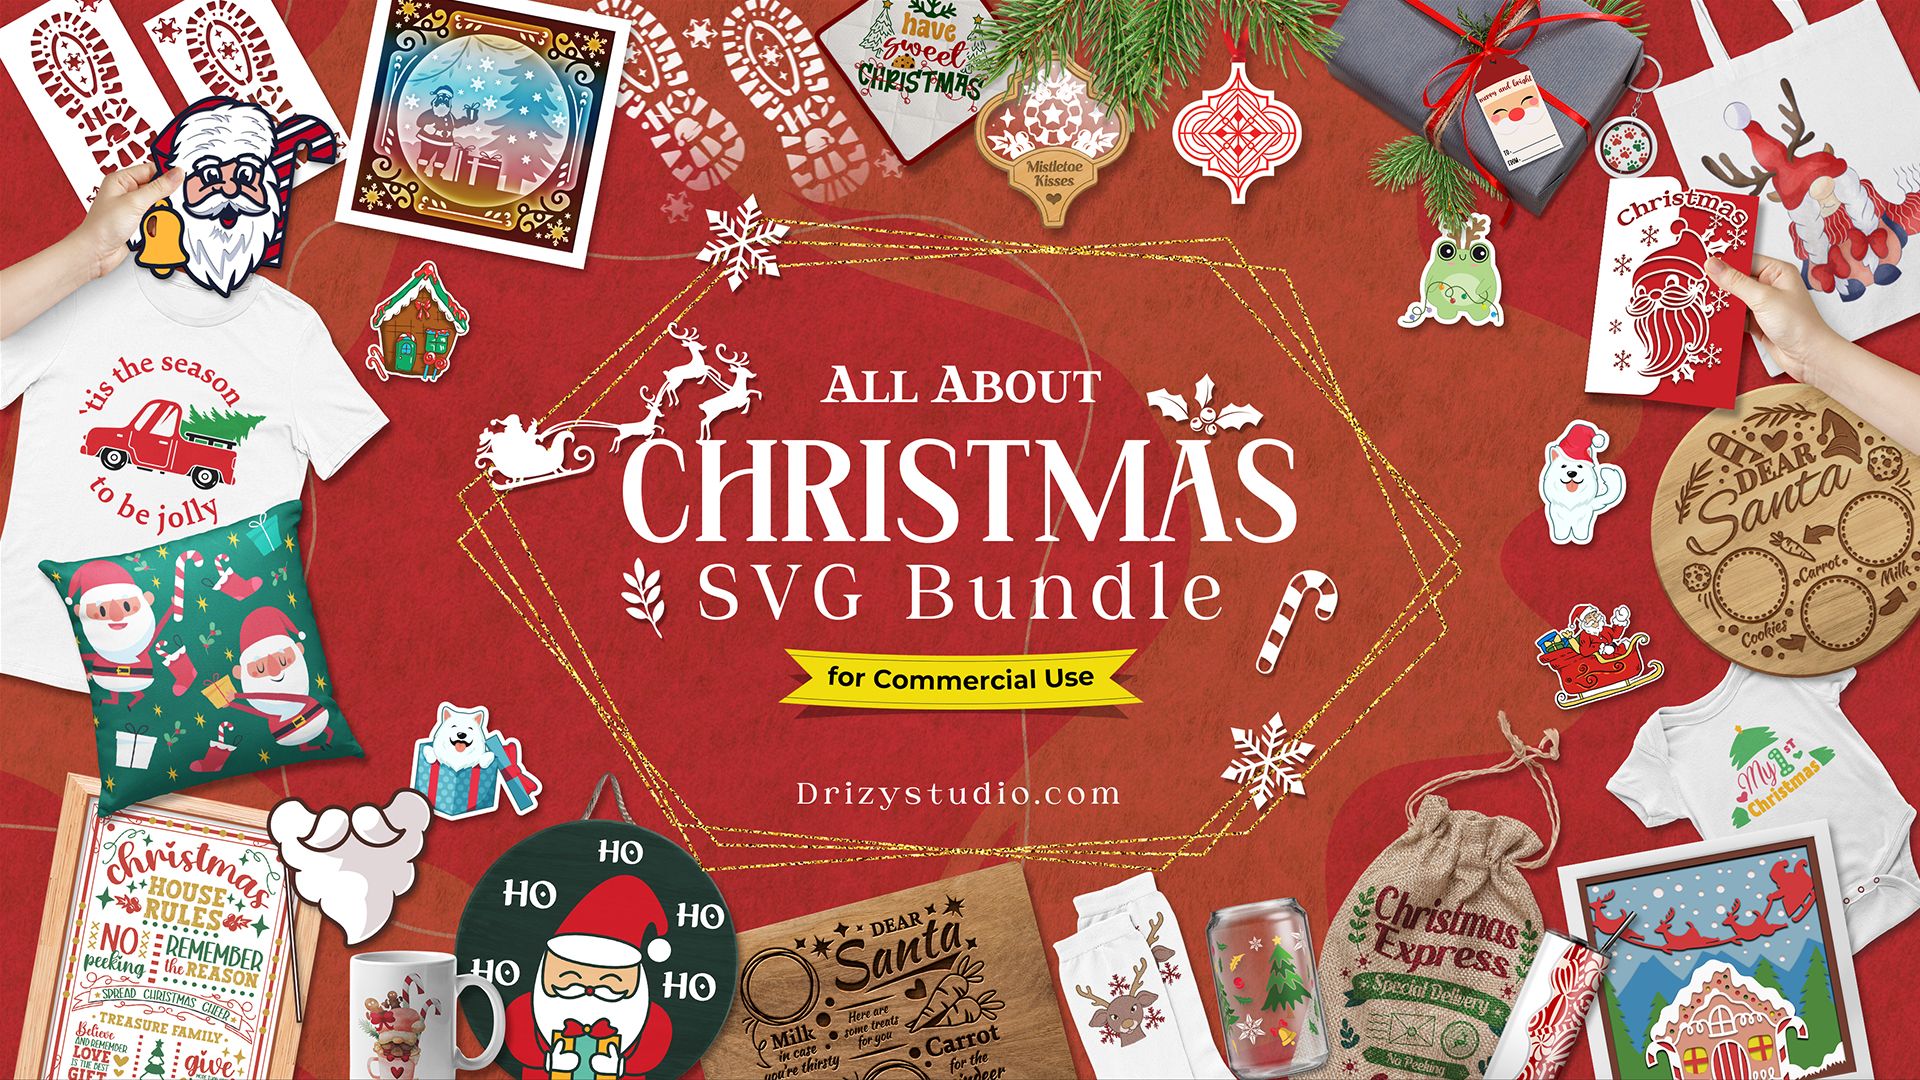 COVER CHRISTMAS SVG BUNDLE - Christmas SVG Files for Commercial Use